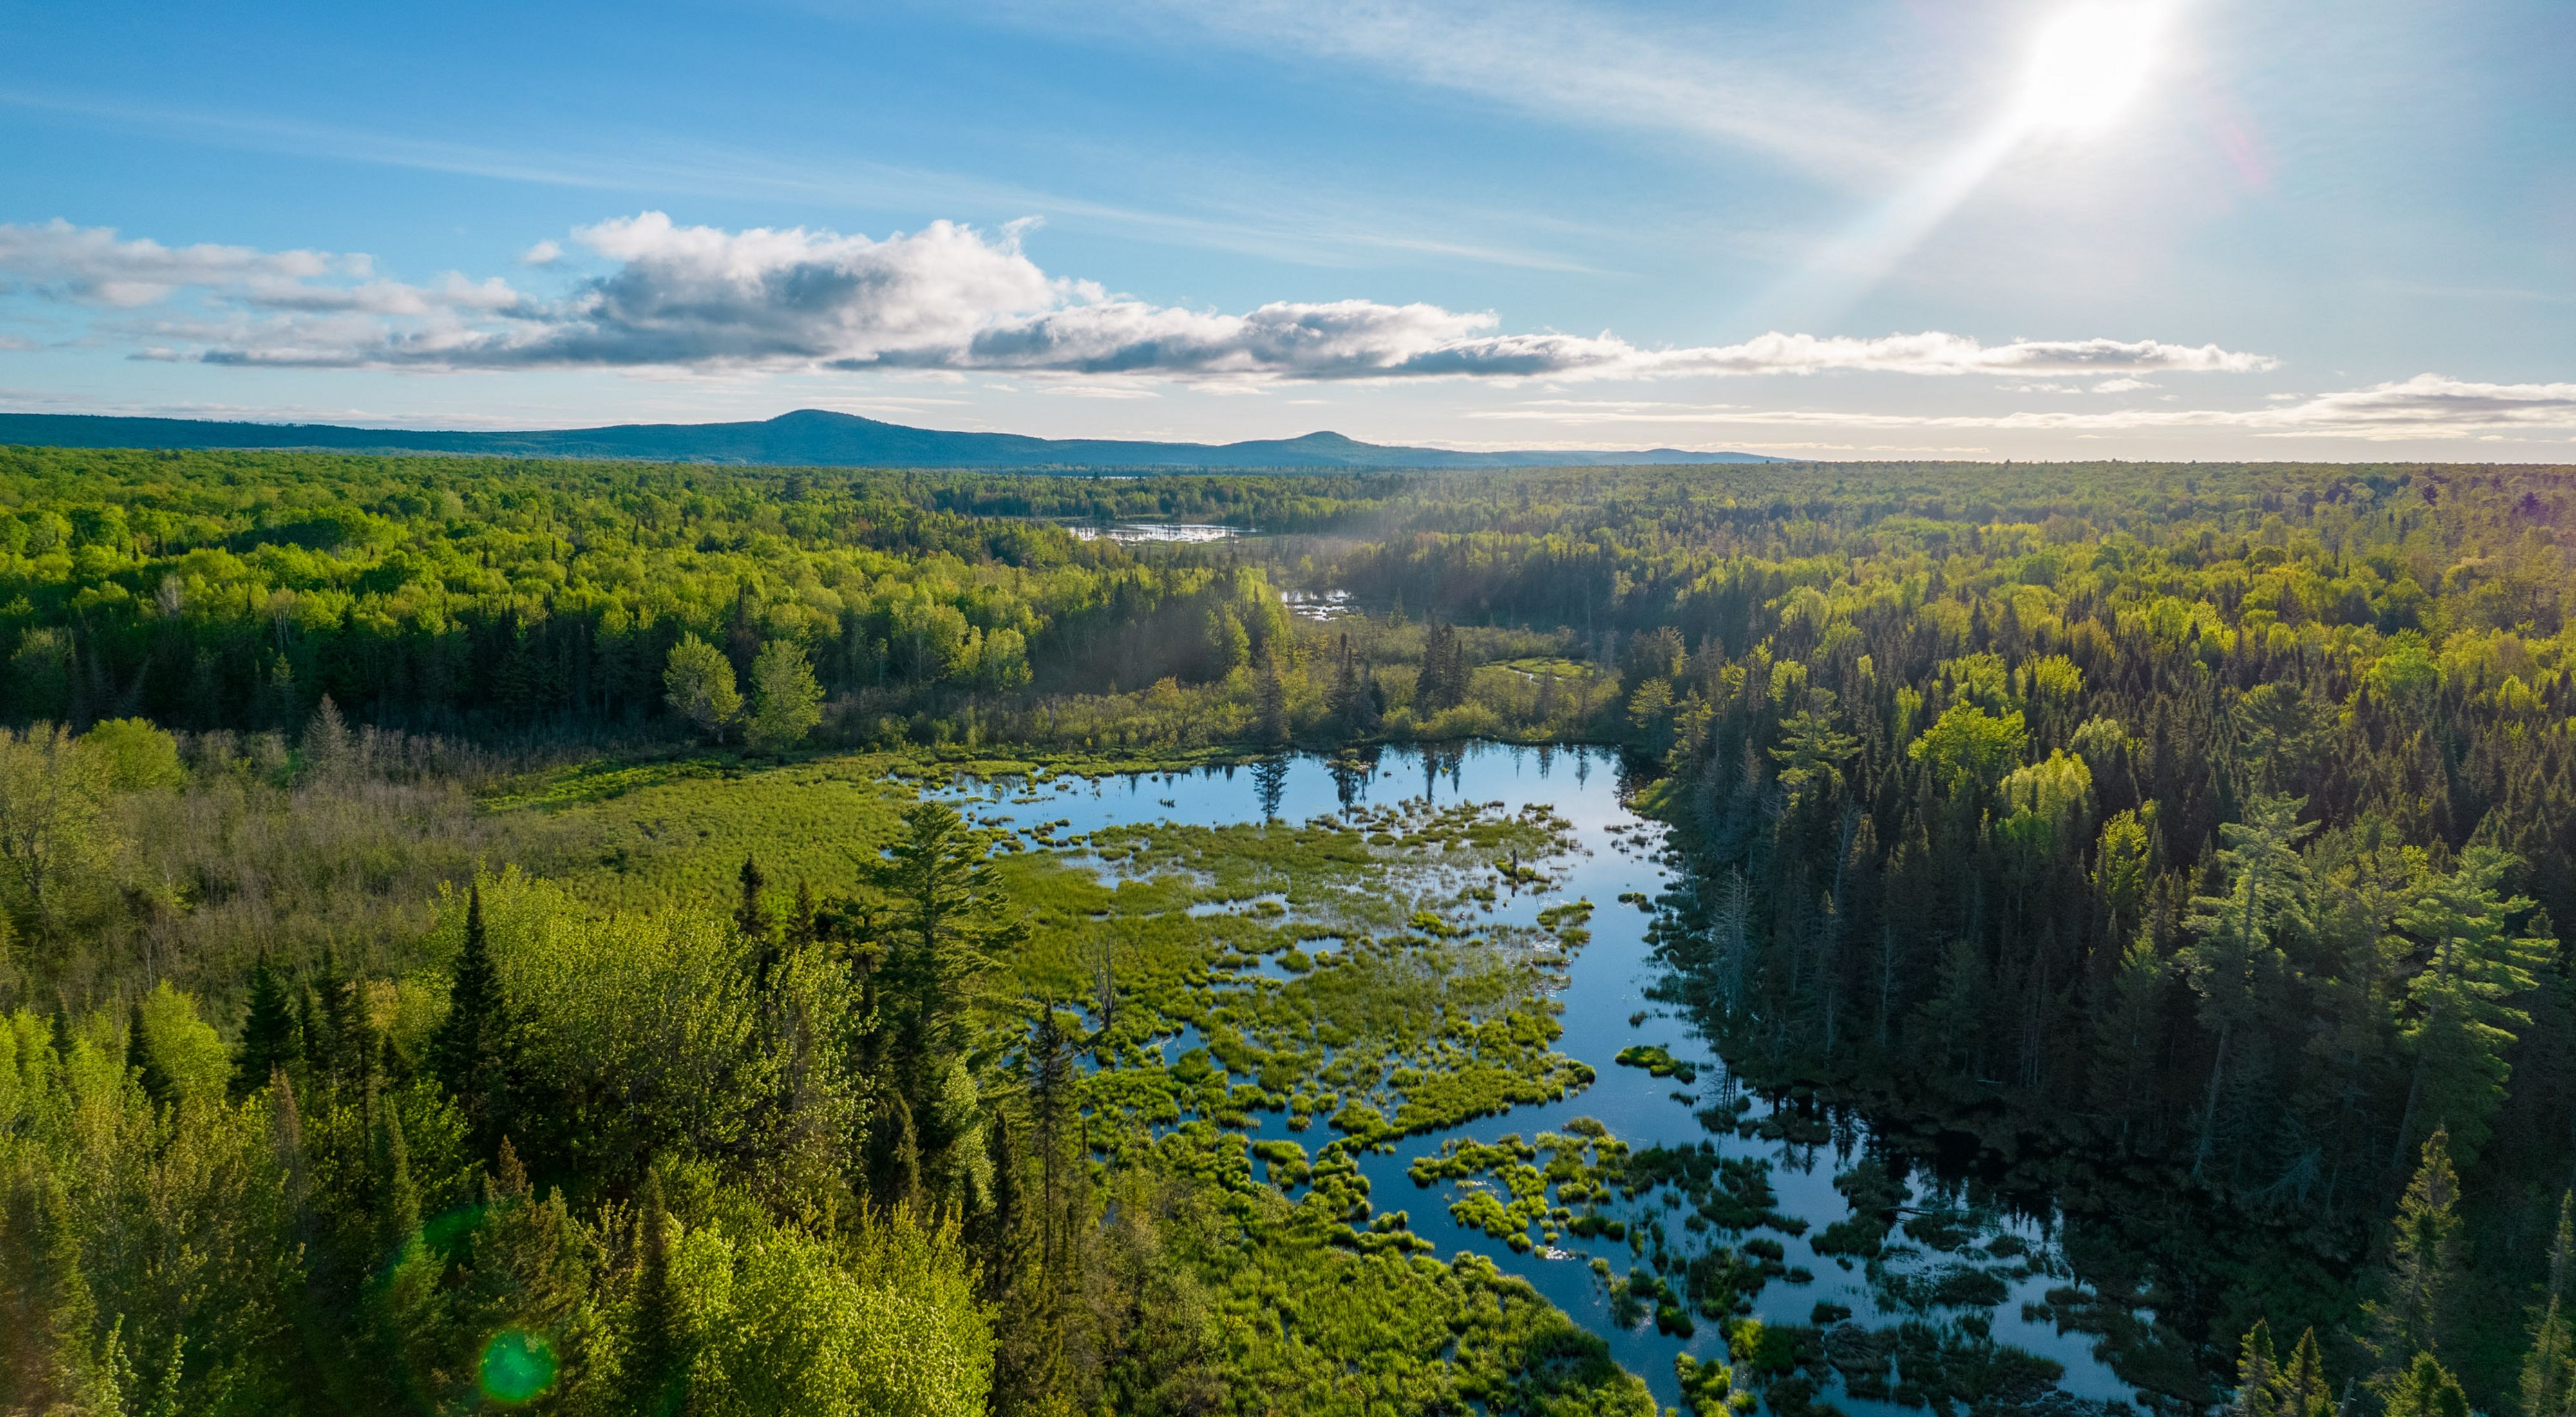 Aerial view of a vast forest with various shades of green and bright blue fresh water in the Keweenaw Peninsula in Michigan on a sunny day. White, fluffy clouds dot the sky.